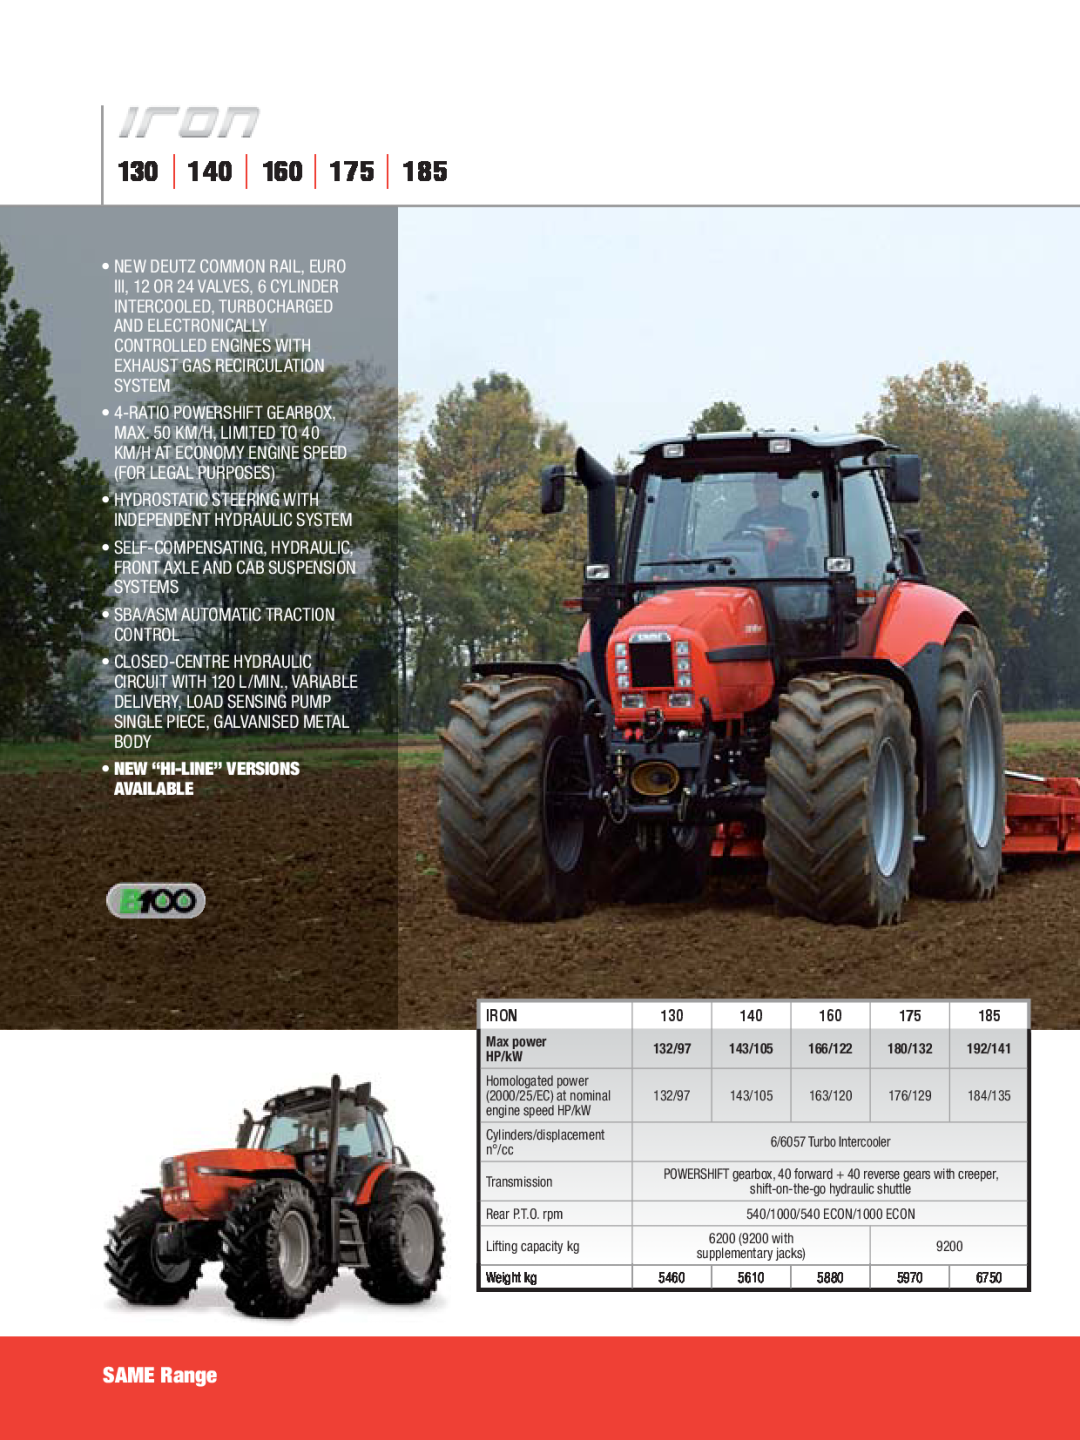 SAME Tractors 130 140 160 175, SAME Range, •Sba/Asm Automatic Traction Control, •New “Hi-Line”Versions Available, Iron 